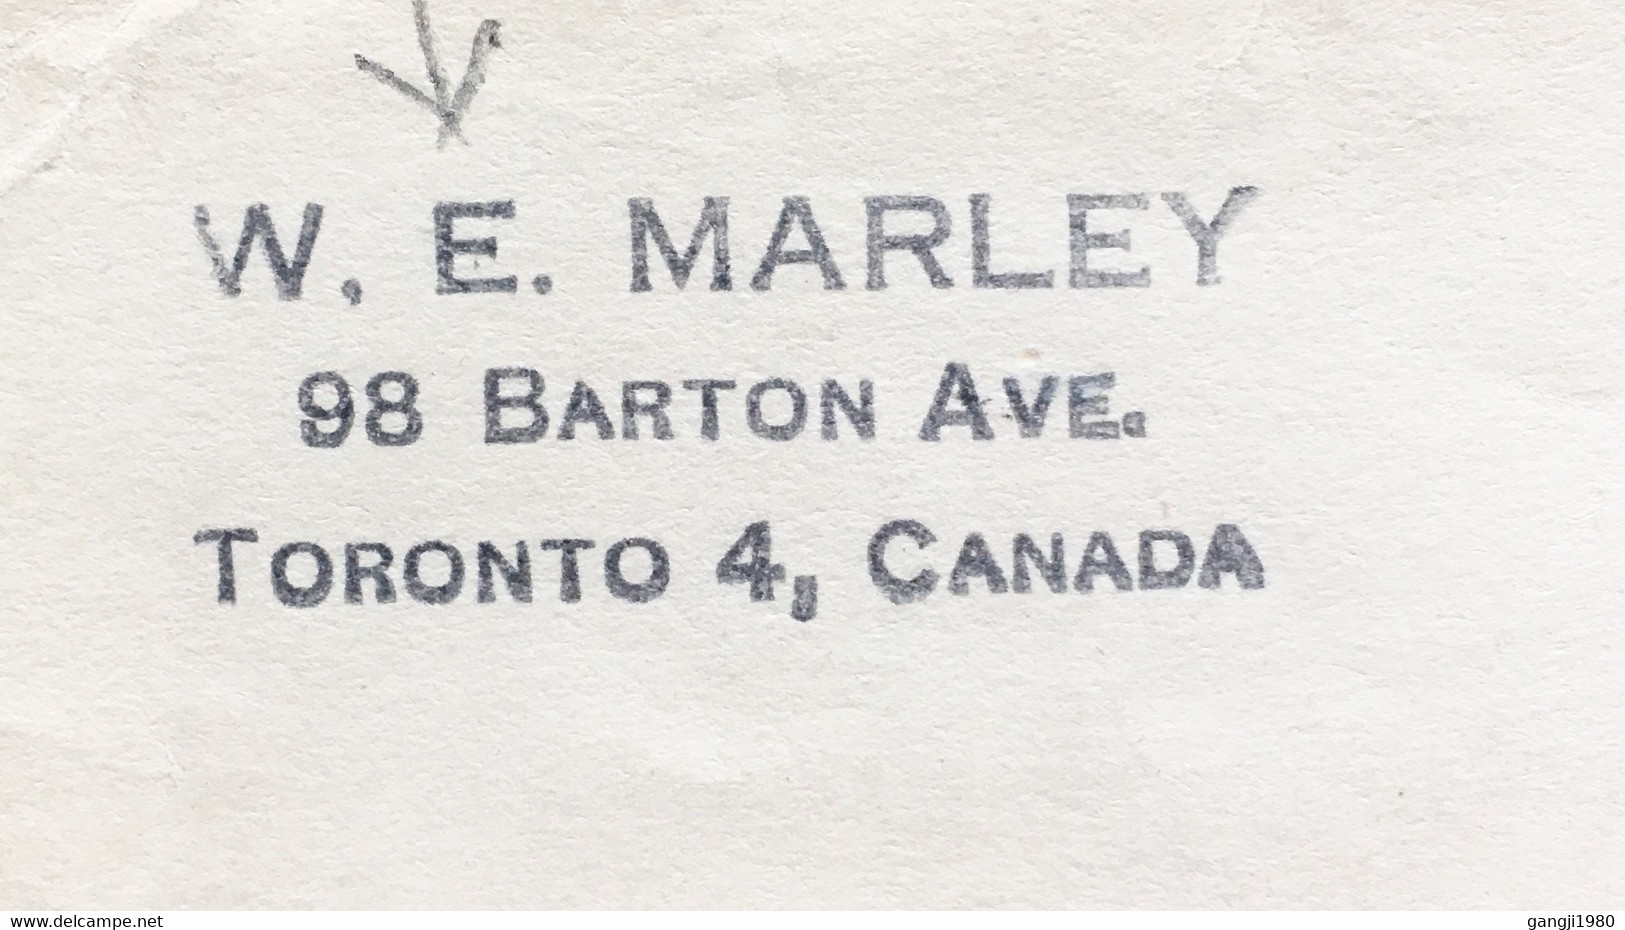 CANADA 1937, HOUSE OF ASSEMBLY CANCELLATION, POSTAL STATIONERY, KING GEORGE COVER, W. E. MARLEY TO MR. F. W. SEAMAN, USA - 1903-1954 De Koningen